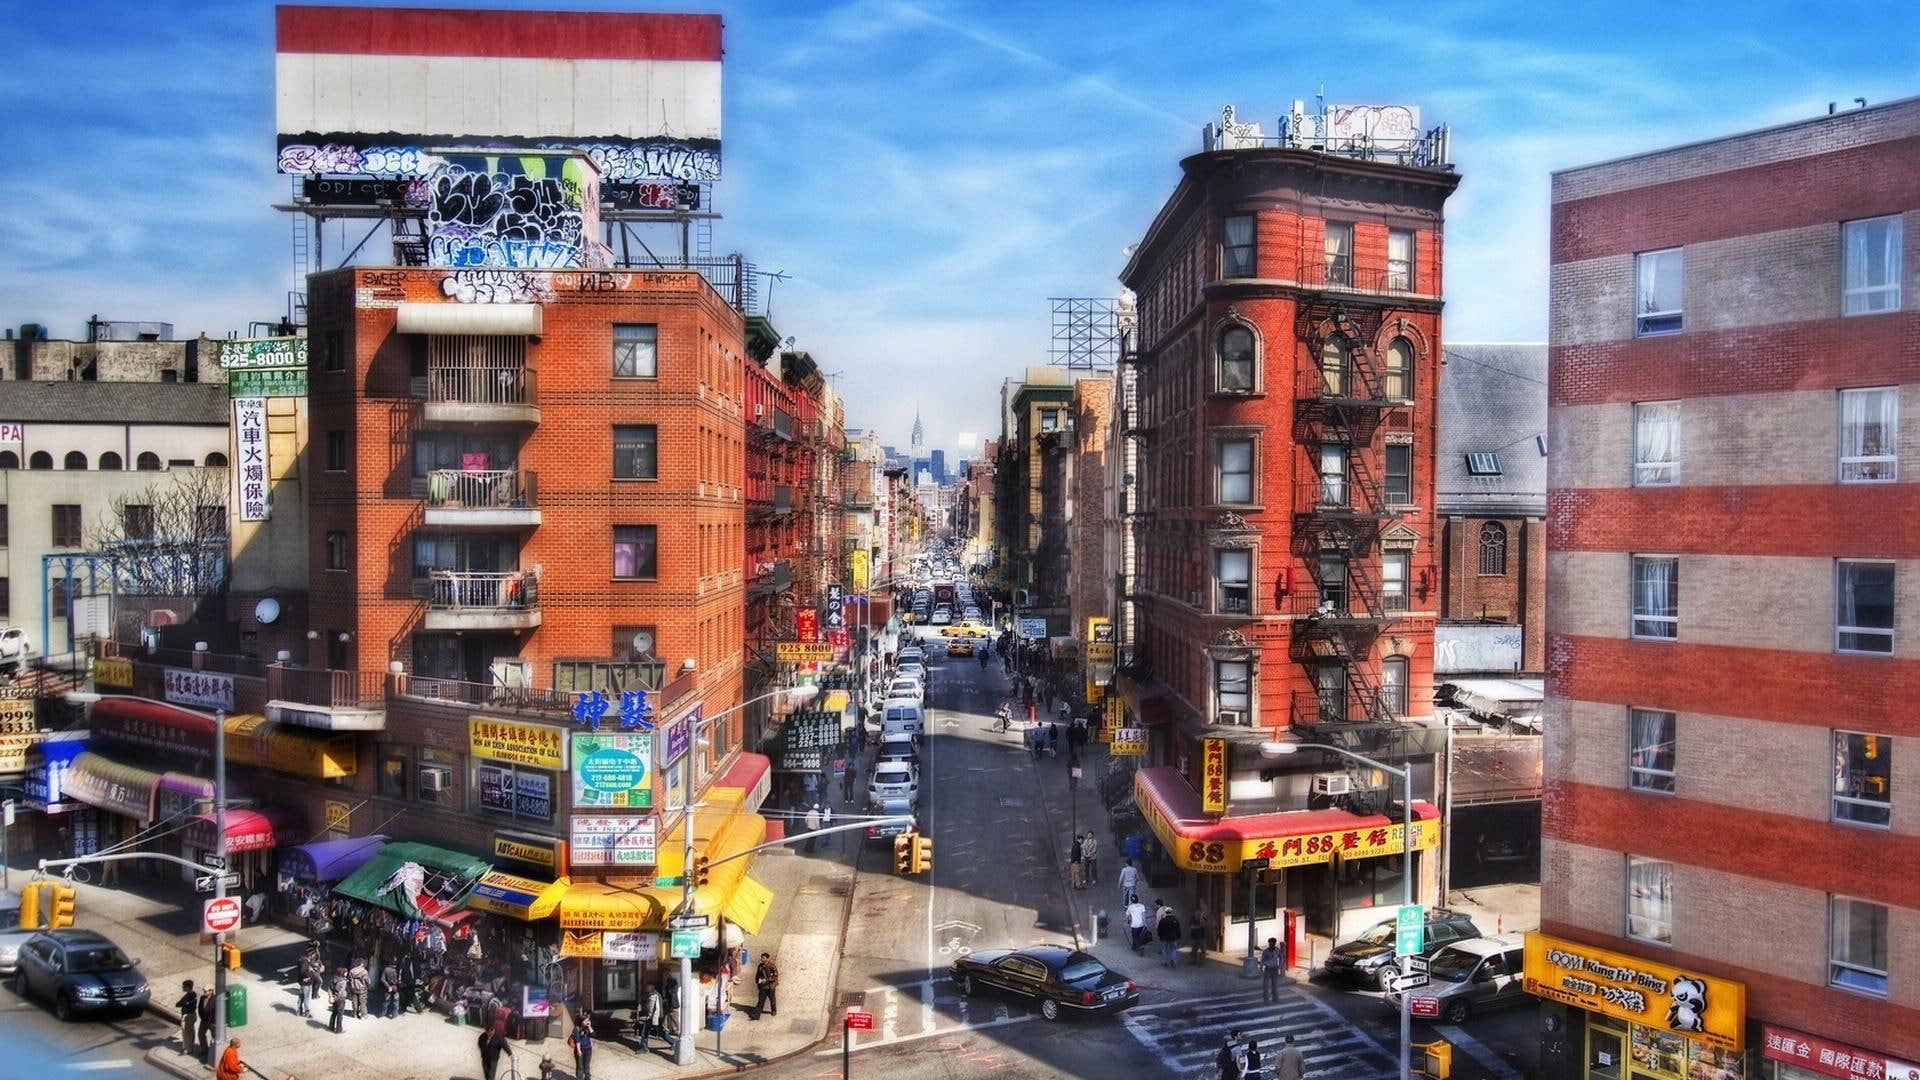 Entering New York City Chinatown Hdr, stores, sreets, nature and landscapes